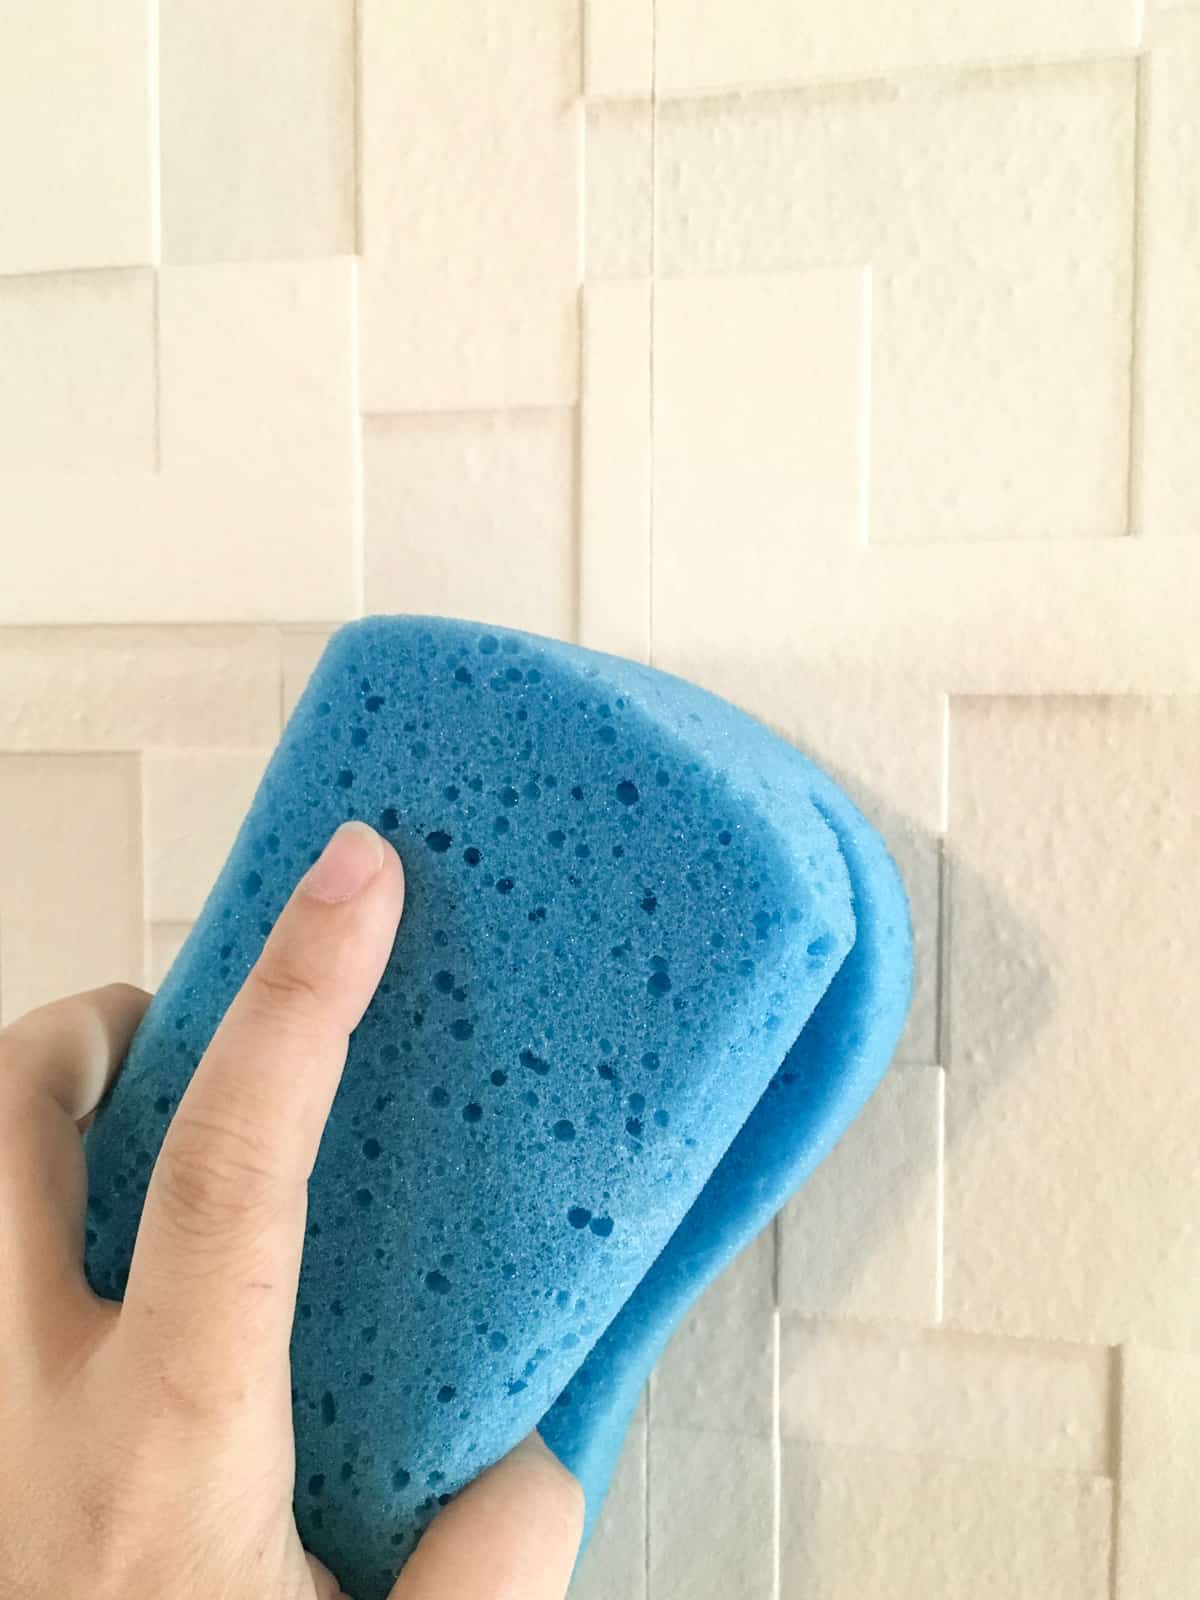 wiping off excess wallpaper paste with a sponge